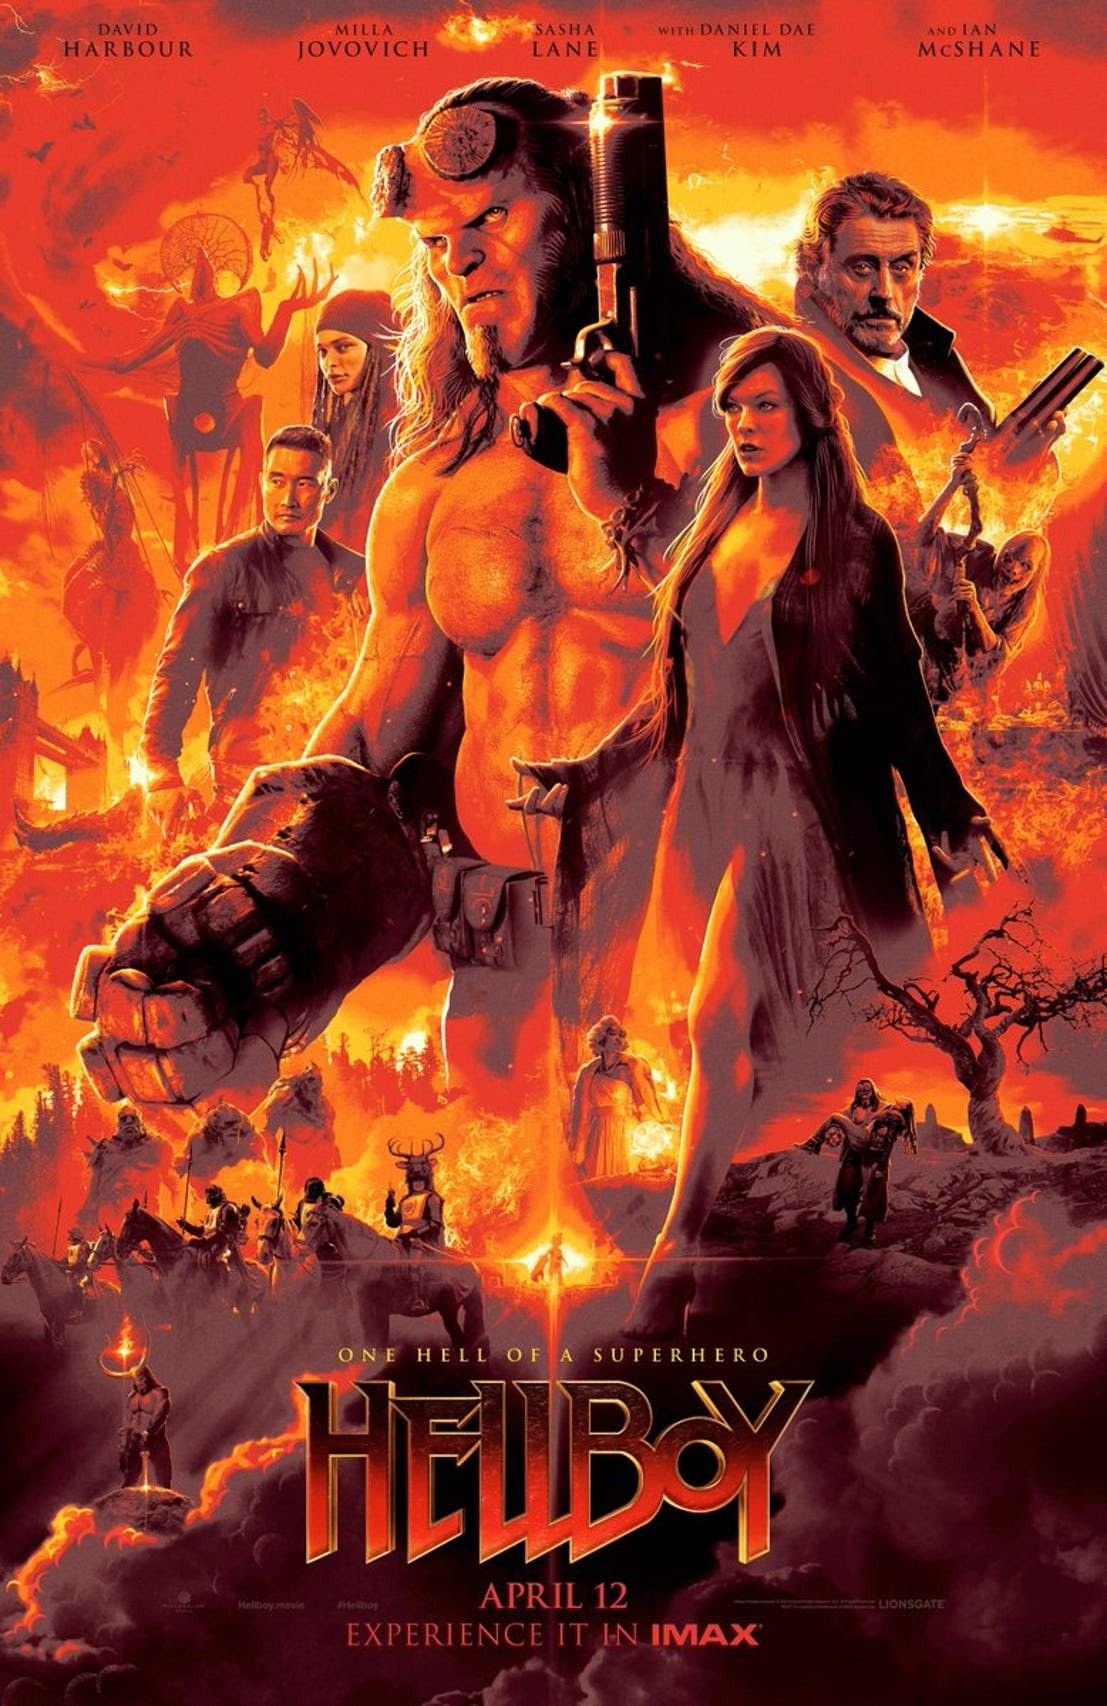 Hellboy Posters Spotlight the Reboot’s Monsters & Comic Book Influences